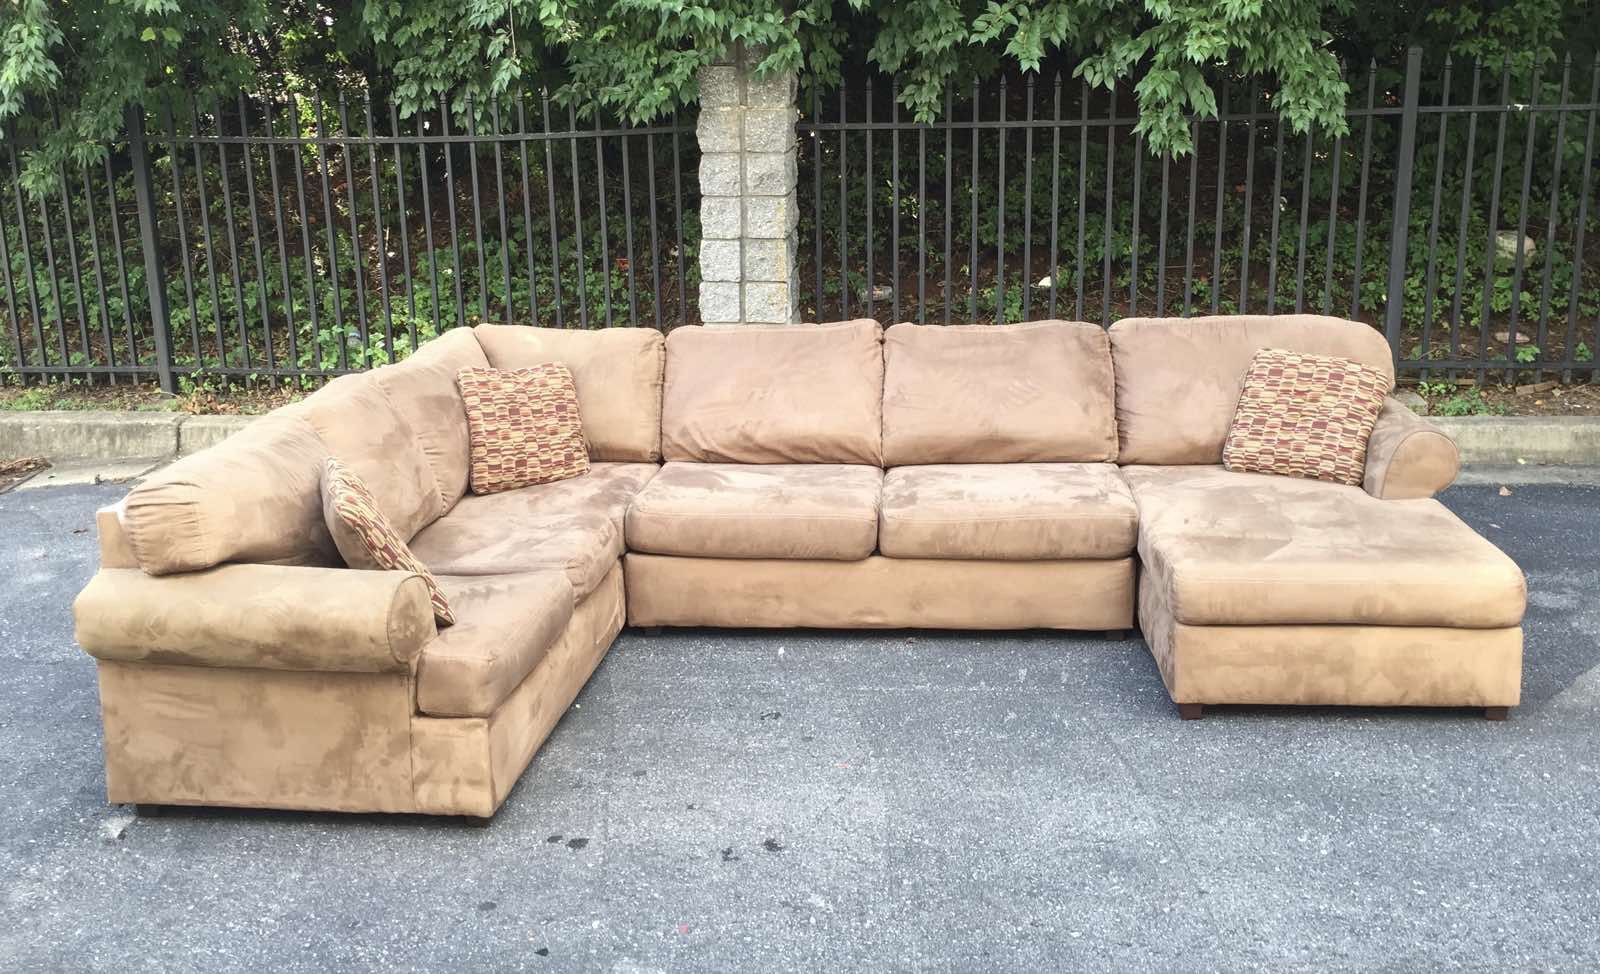 Sectional couch (delivery free)